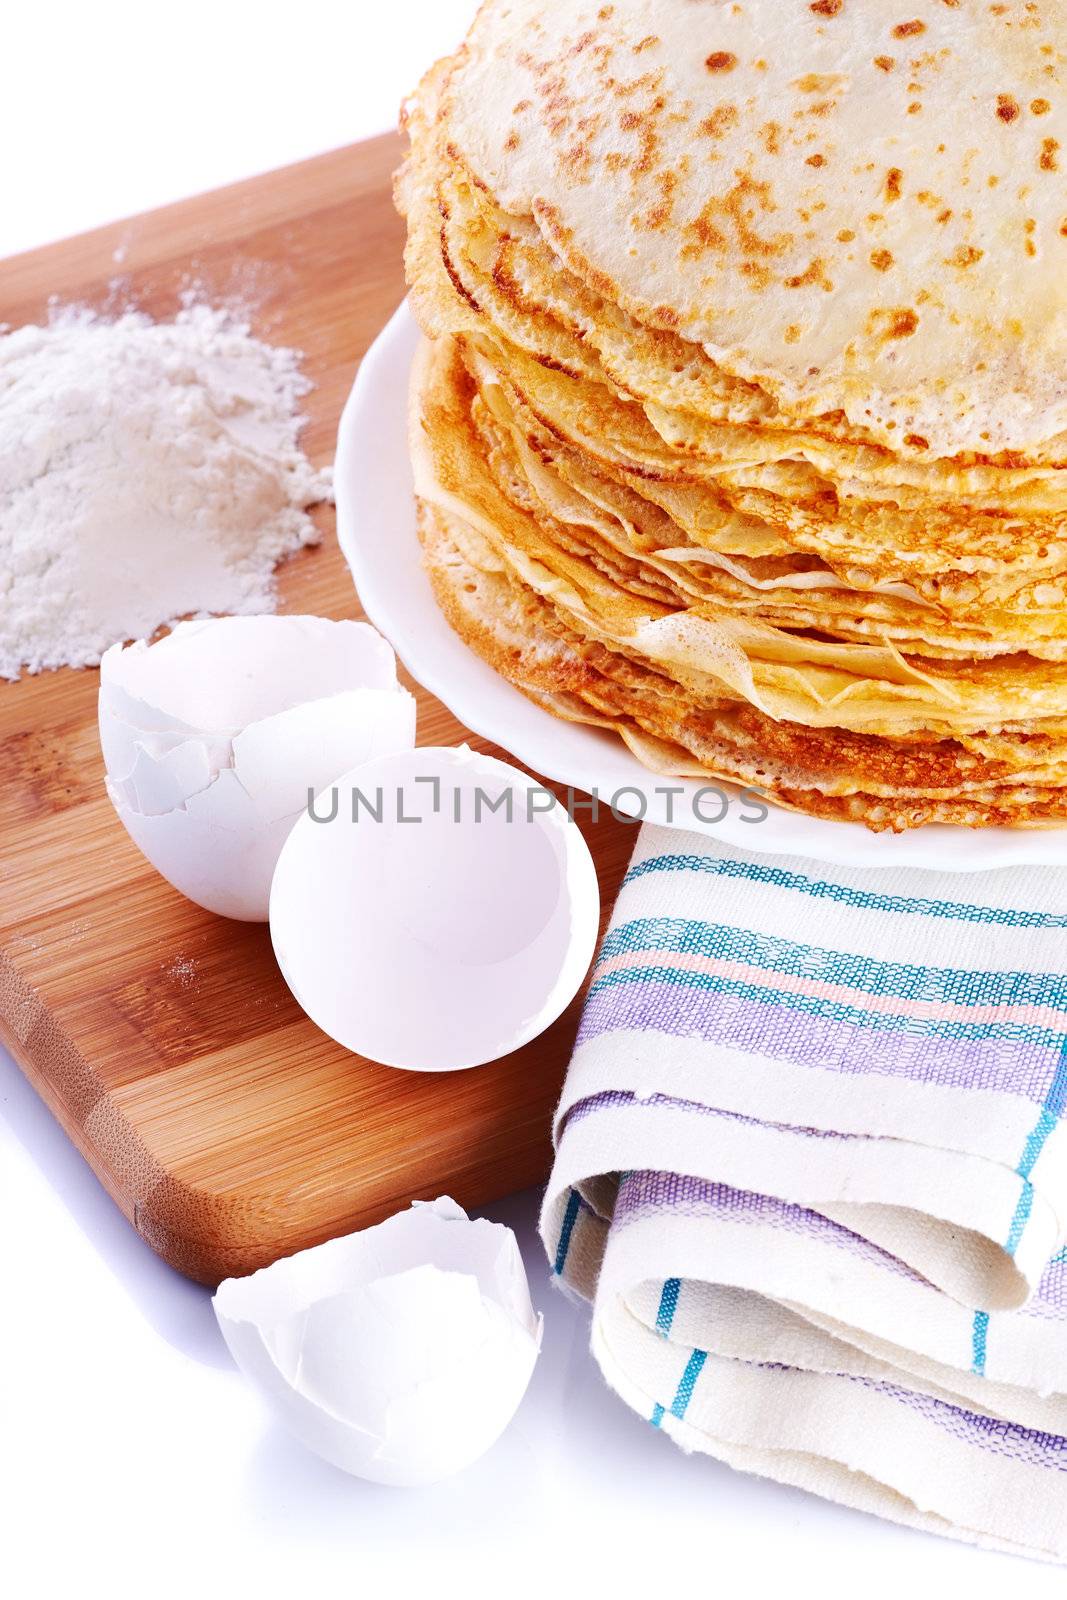 Ingredients of pancakes. Pancakes on a plate. Shell from eggs and pancakes.